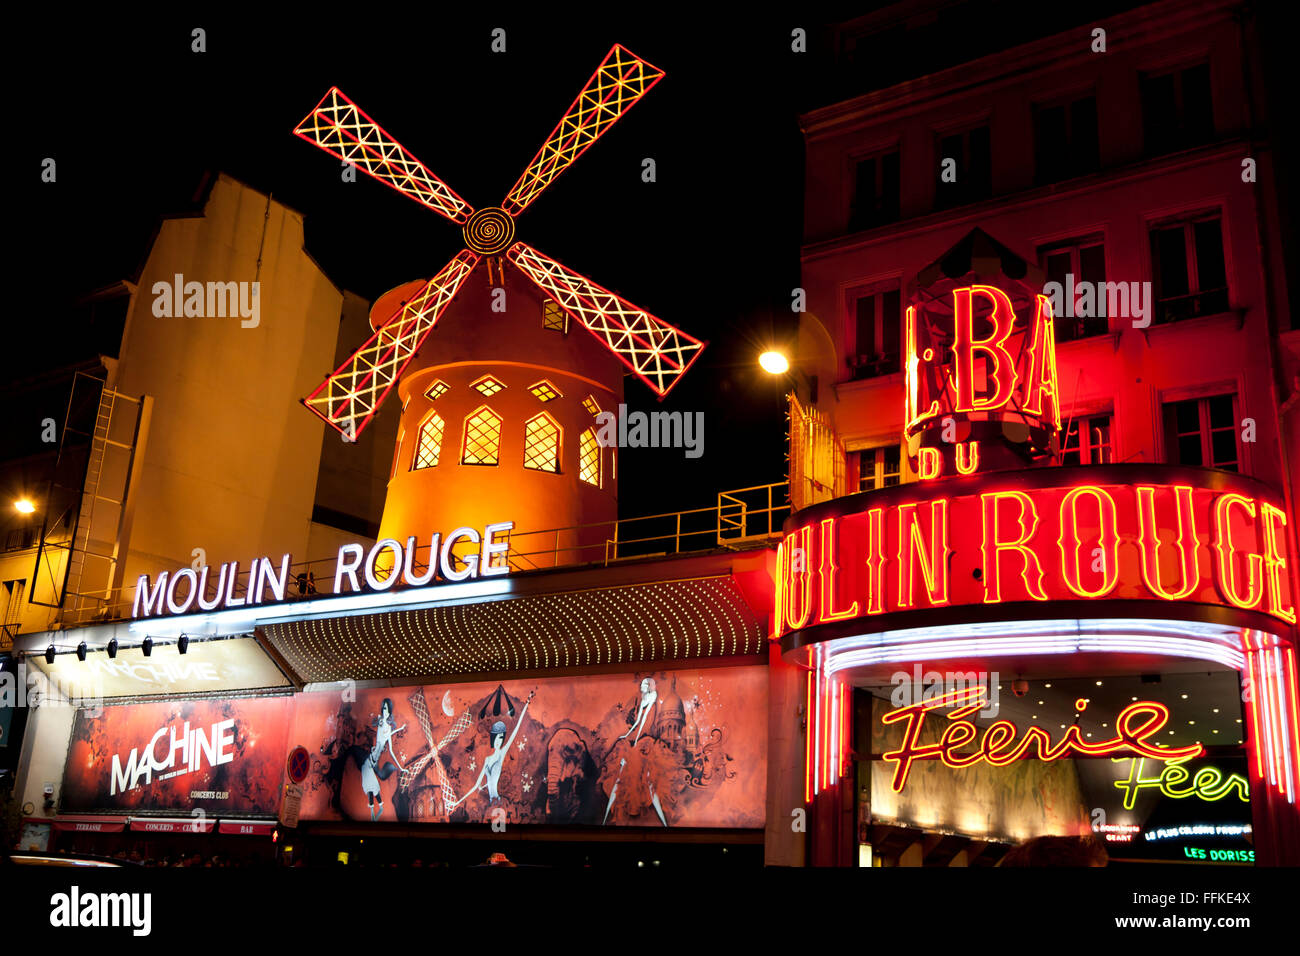 Moulin Rouge Montmartre Paris France in the evening Stock Photo